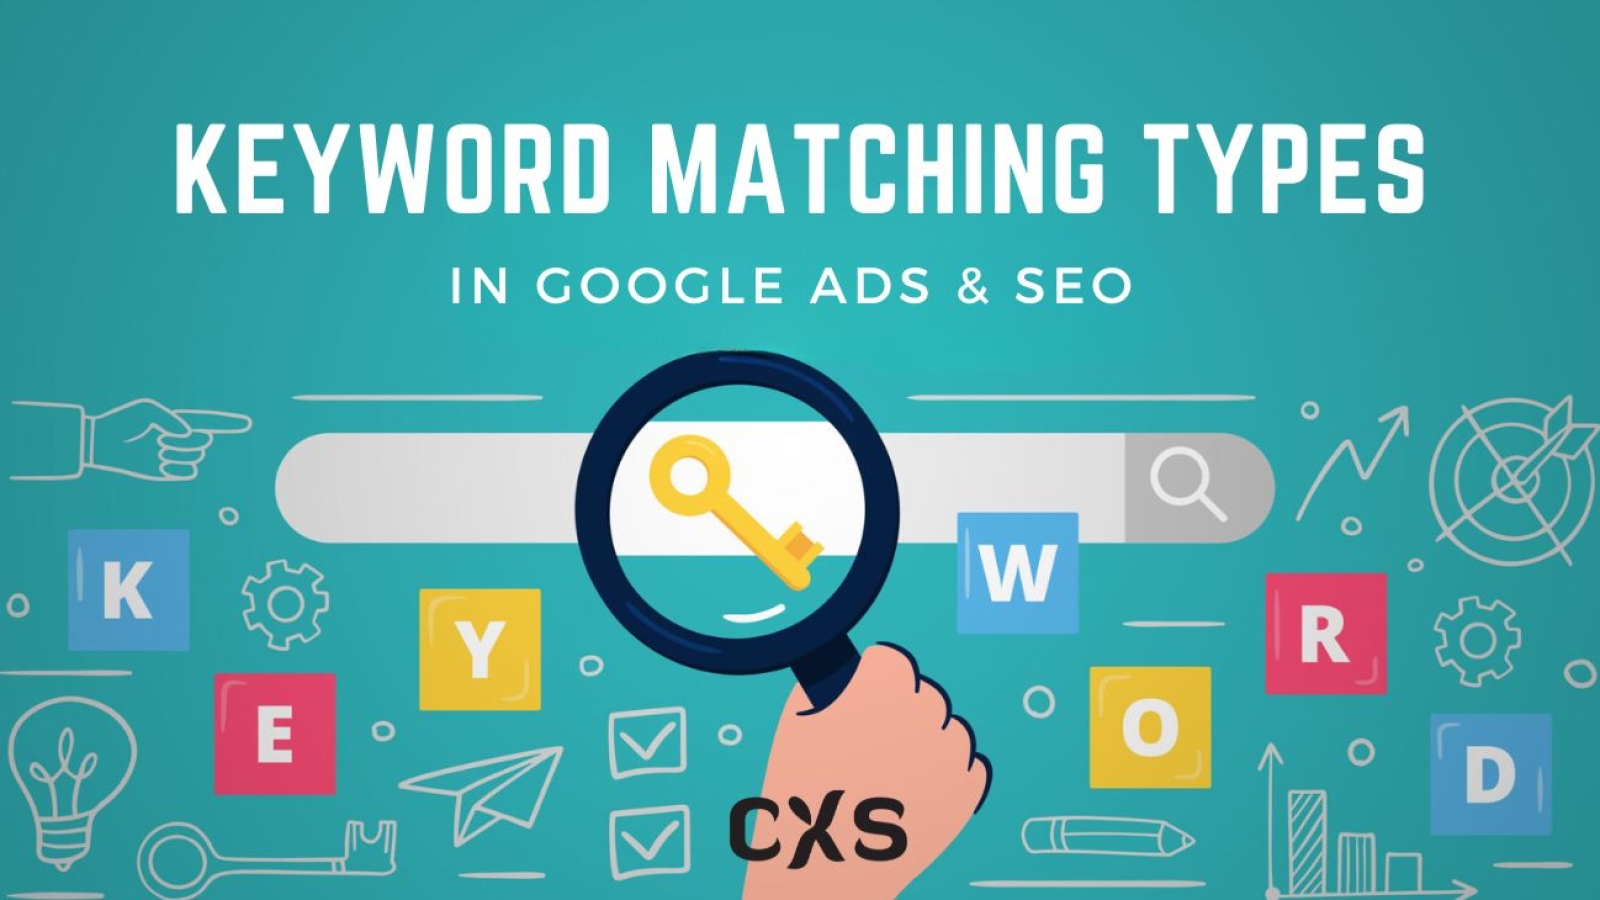 Keyword Matching Types in SEO and Google Ads